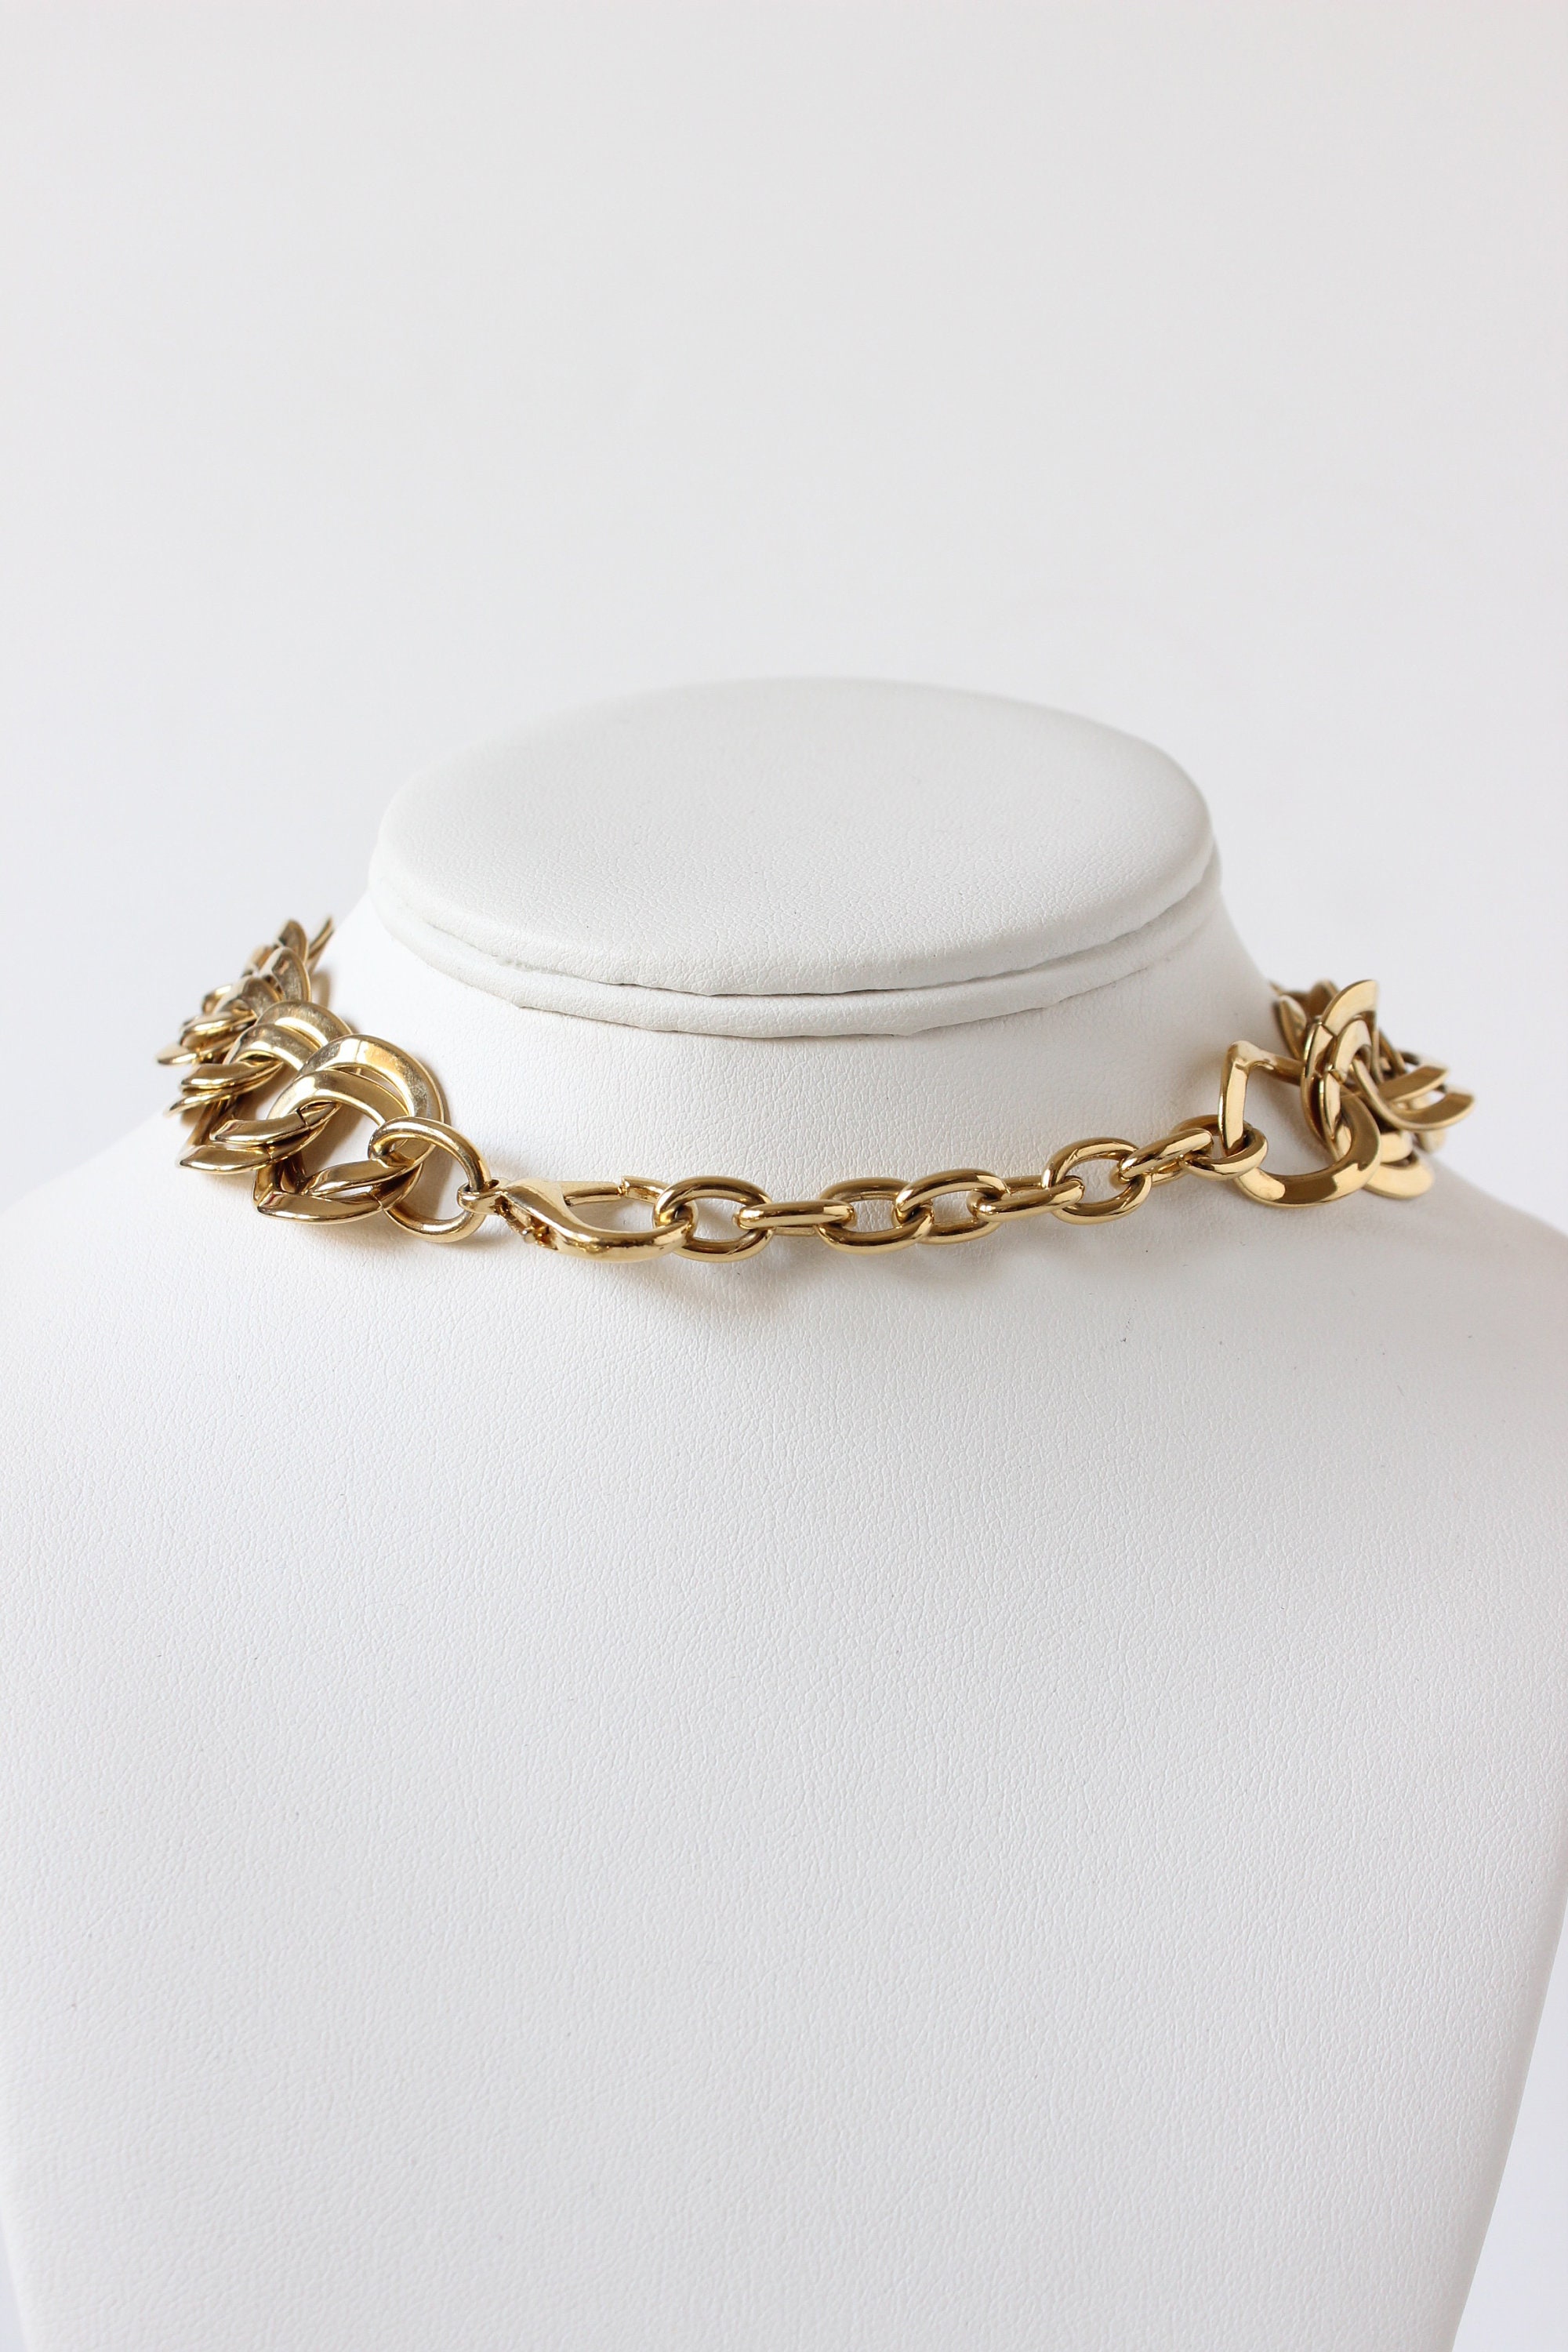 Vintage Chunky Gold Tone Chain Necklace - Etsy